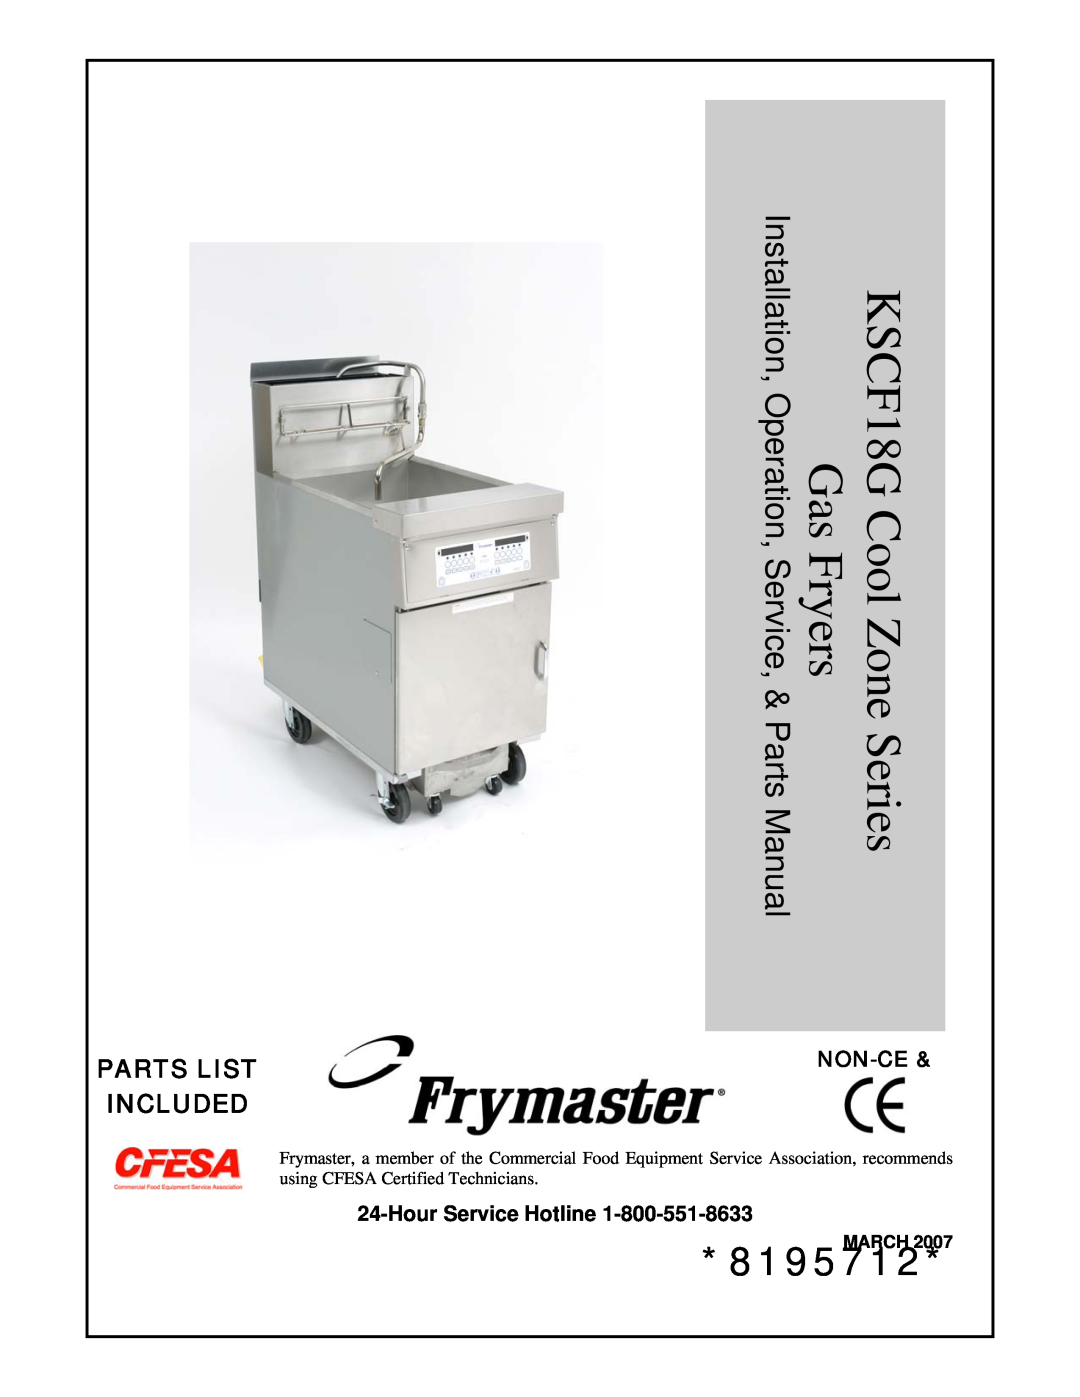 Frymaster manual Parts List Included, Non-Ce, HourService Hotline, Gas Fryers, KSCF18G Cool Zone, Series, 8195712 